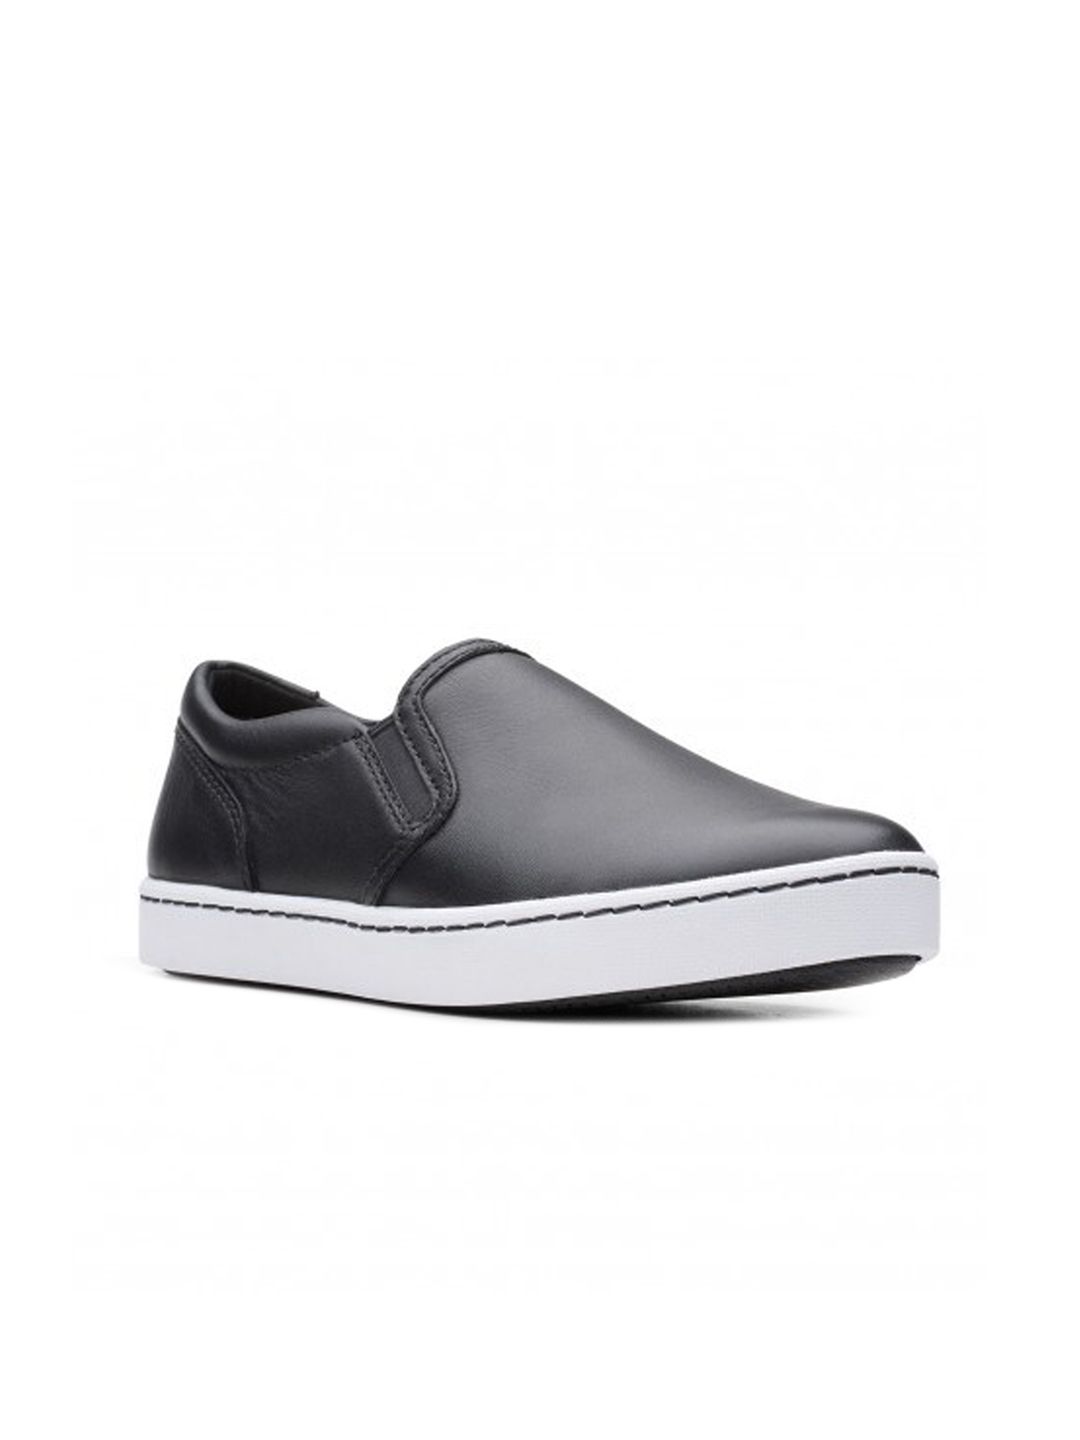 Clarks Women Black Solid Leather Slip-On Sneakers Price in India